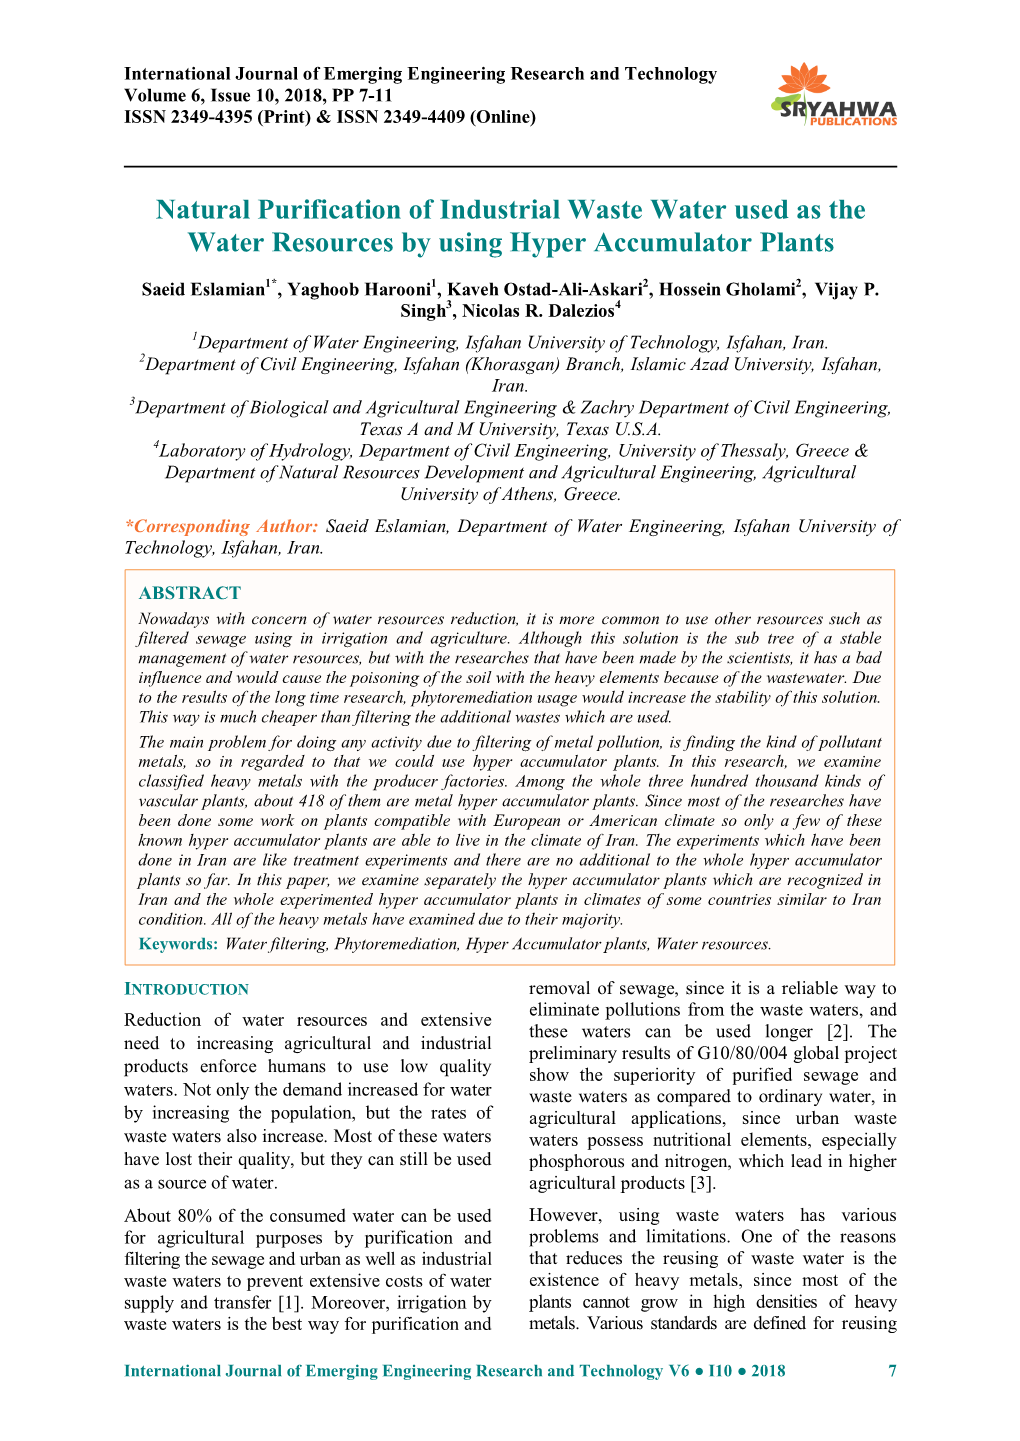 Natural Purification of Industrial Waste Water Used As the Water Resources by Using Hyper Accumulator Plants